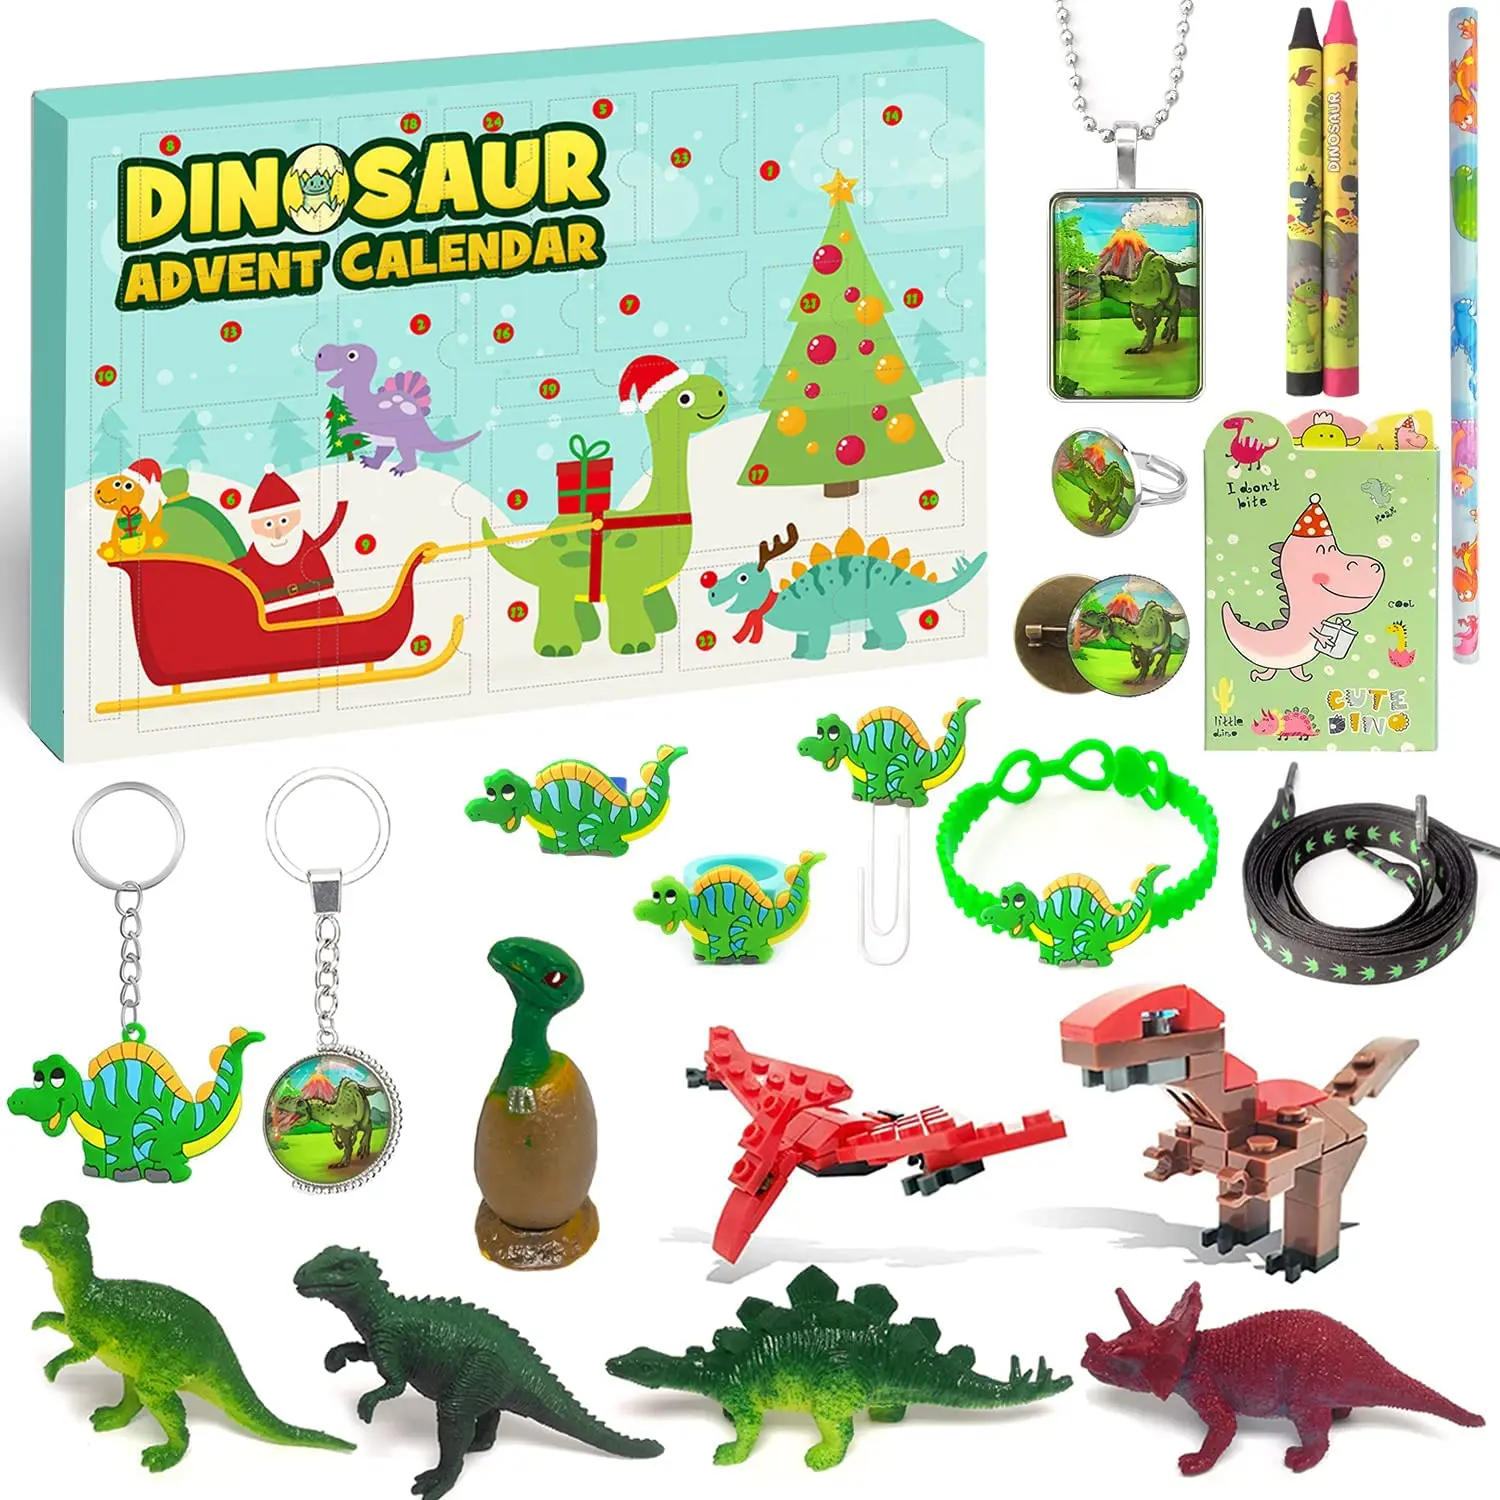 

Dinosaur Advent Calendar 2022 Boys Kids, Dino Figures, Stationery, Necklace, Keychains, Crayon, Brooch, Notes Christmas Countdow